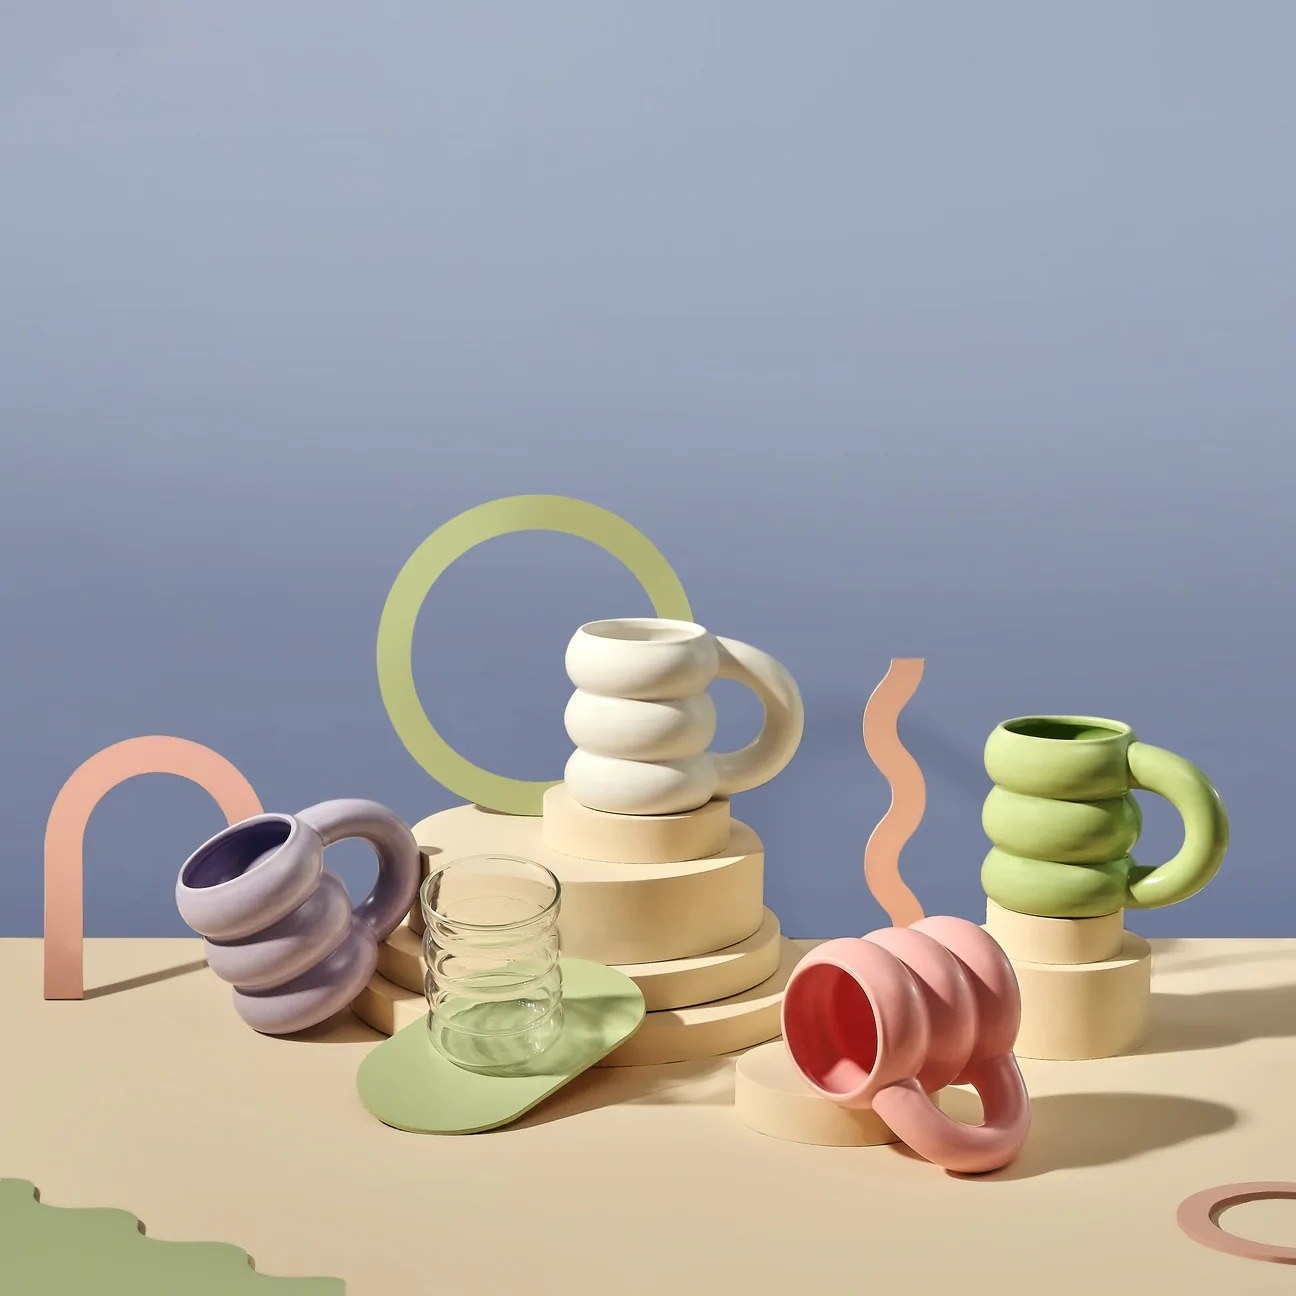 cloud-shaped mugs in pink, white, purple, and green colors